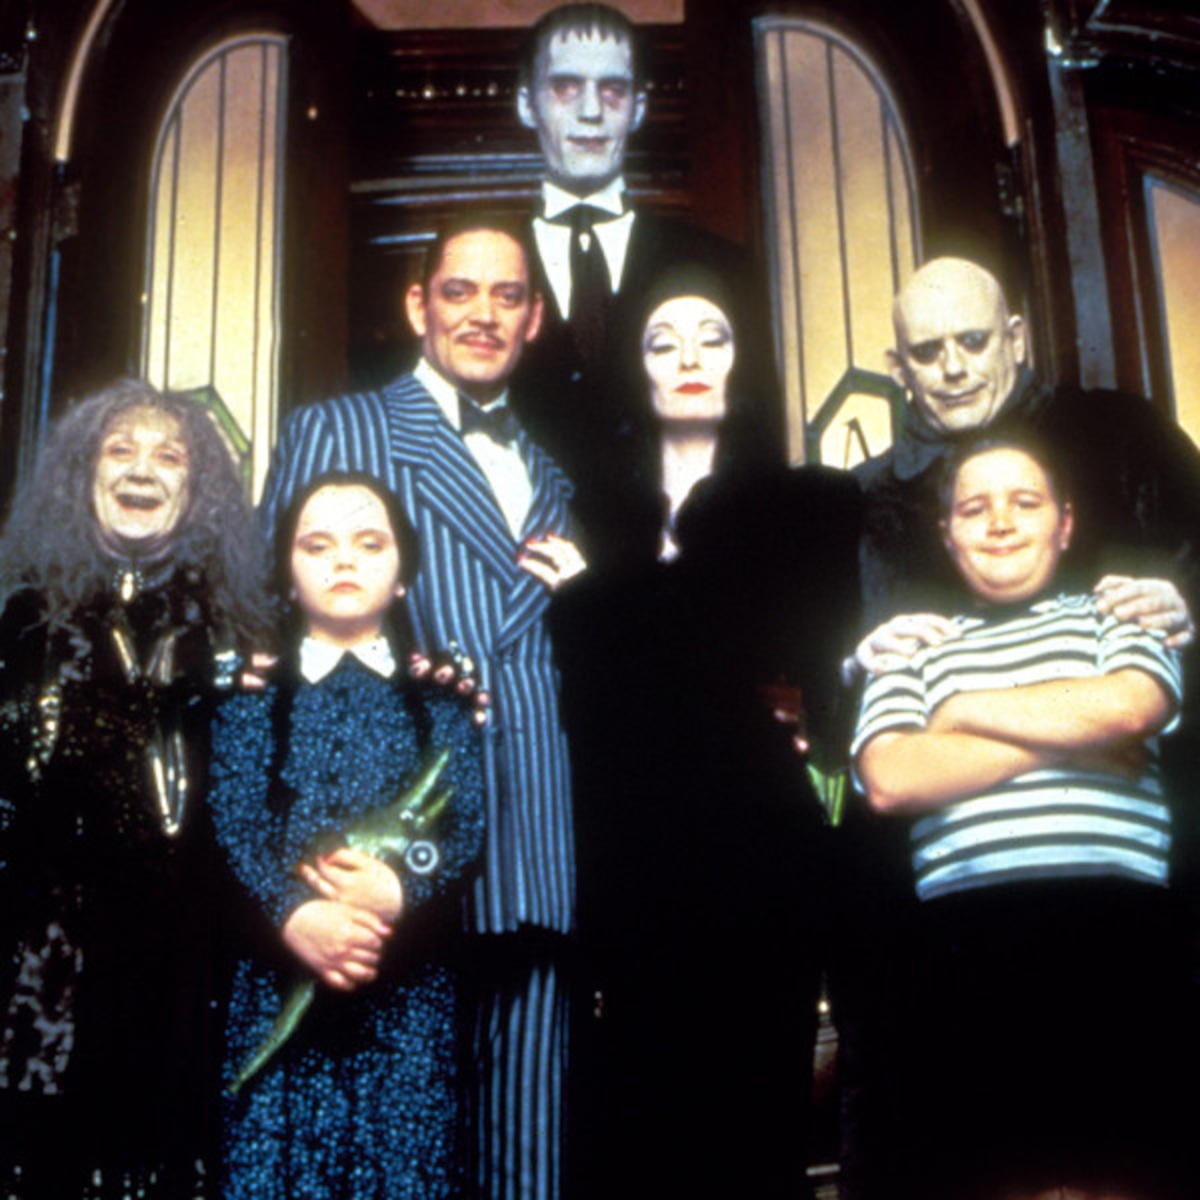 20 Spooky Secrets About The Addams Family Movies Revealed - E! Online